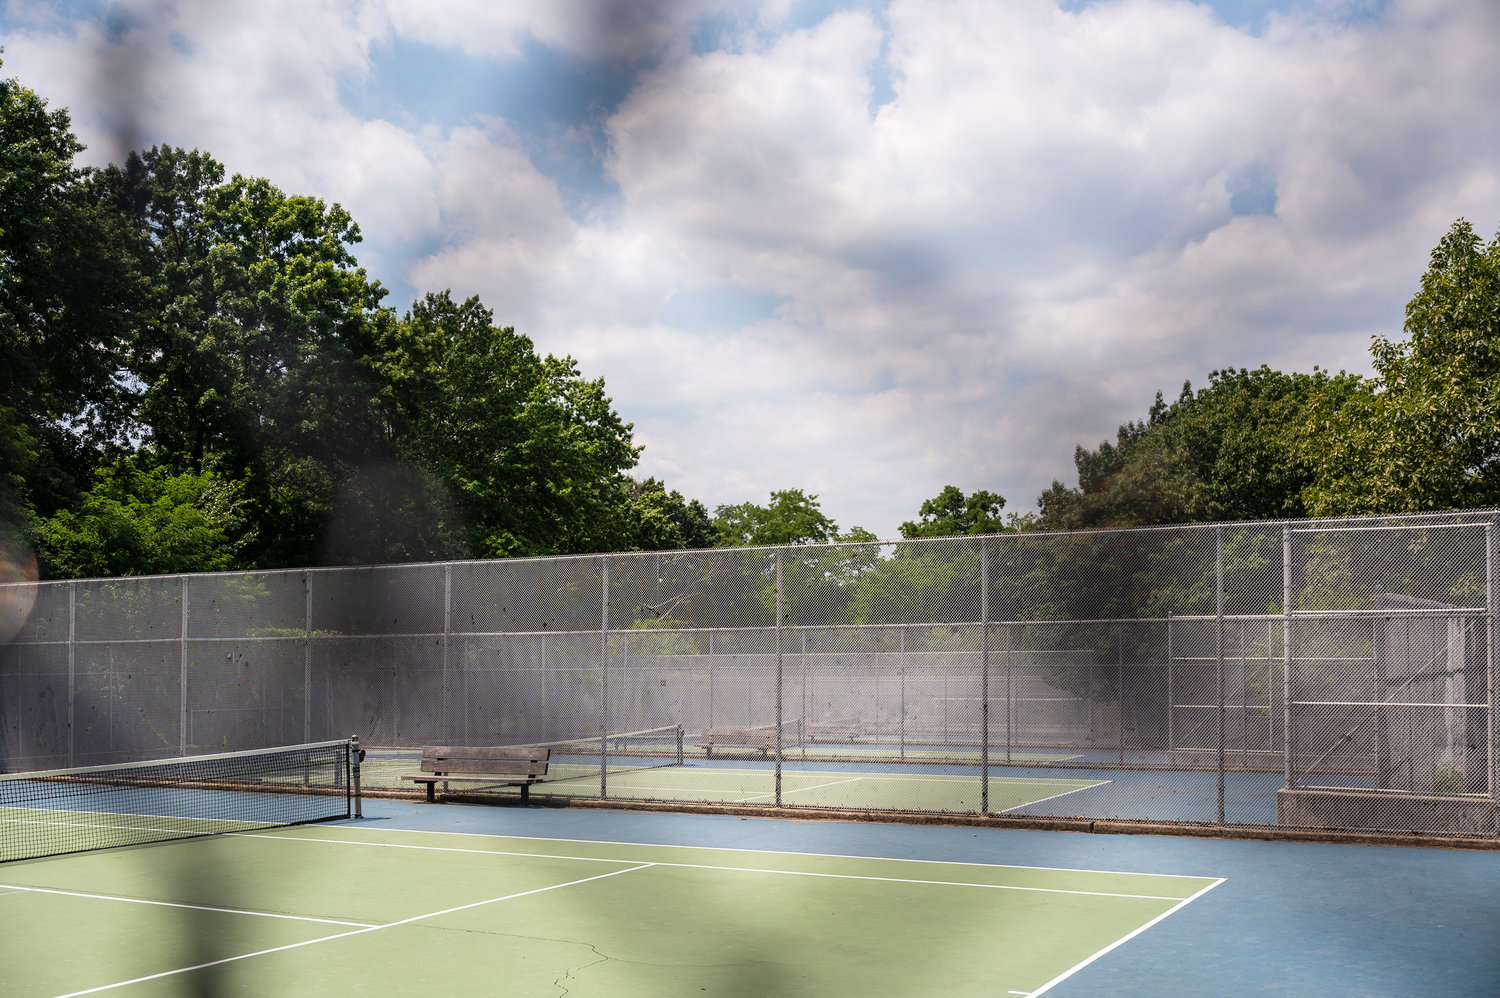 Seton Park has more than a handful of tennis courts places . The community has complained about cracks on the floor, tree limbs hanging and acorns lying on the court. Residents feel that the parks department can add a pickleball court anywhere inside. However, it would require a capital project, which the parks department is not considering.